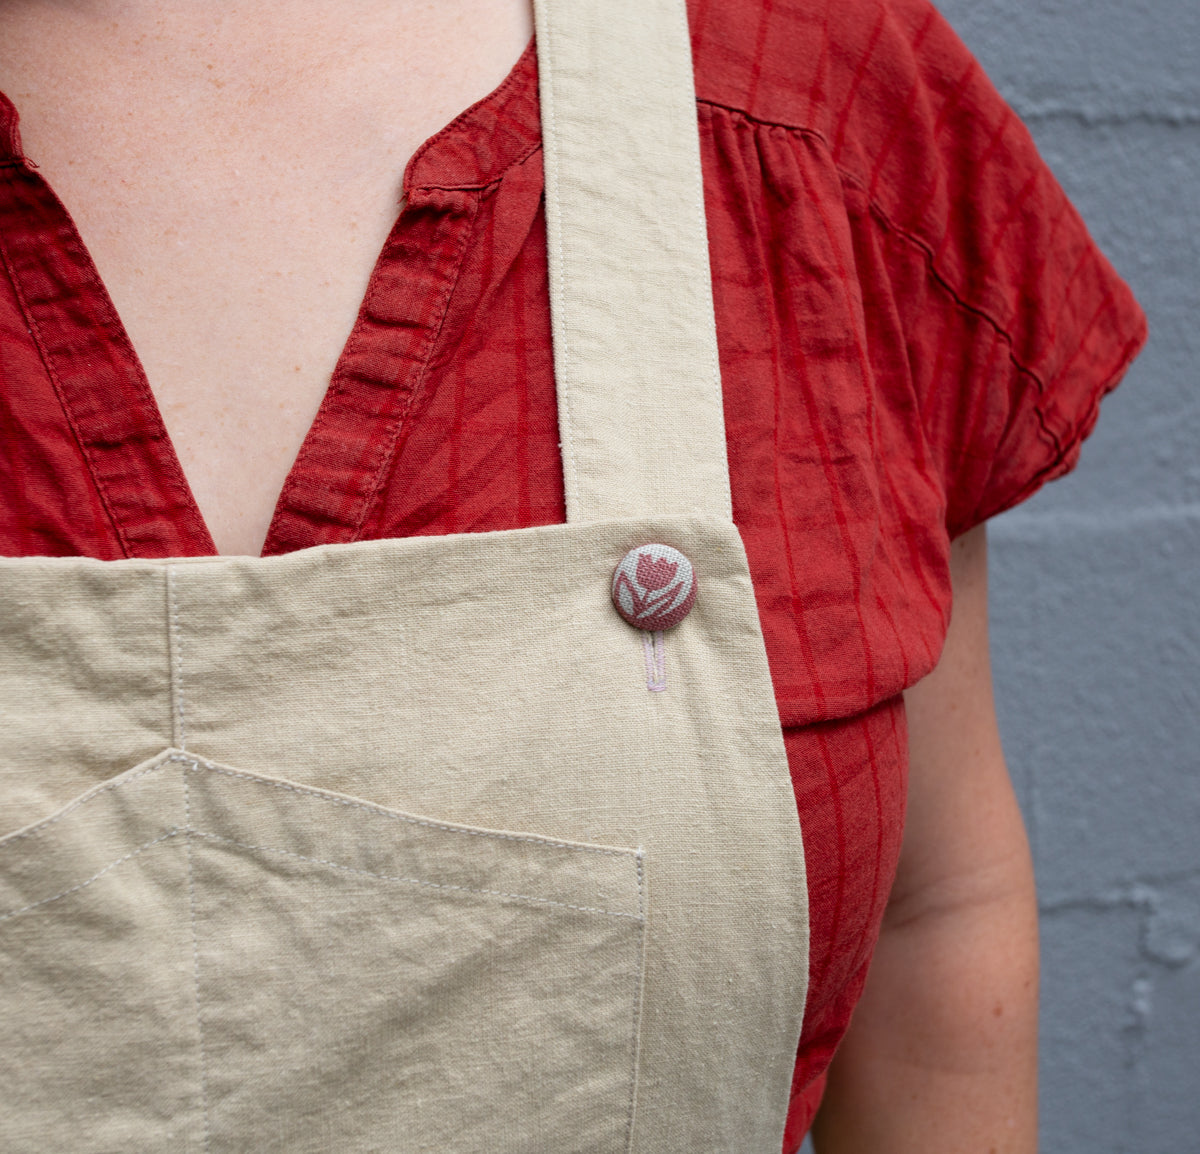 NEW | Fabric Covered Buttons!